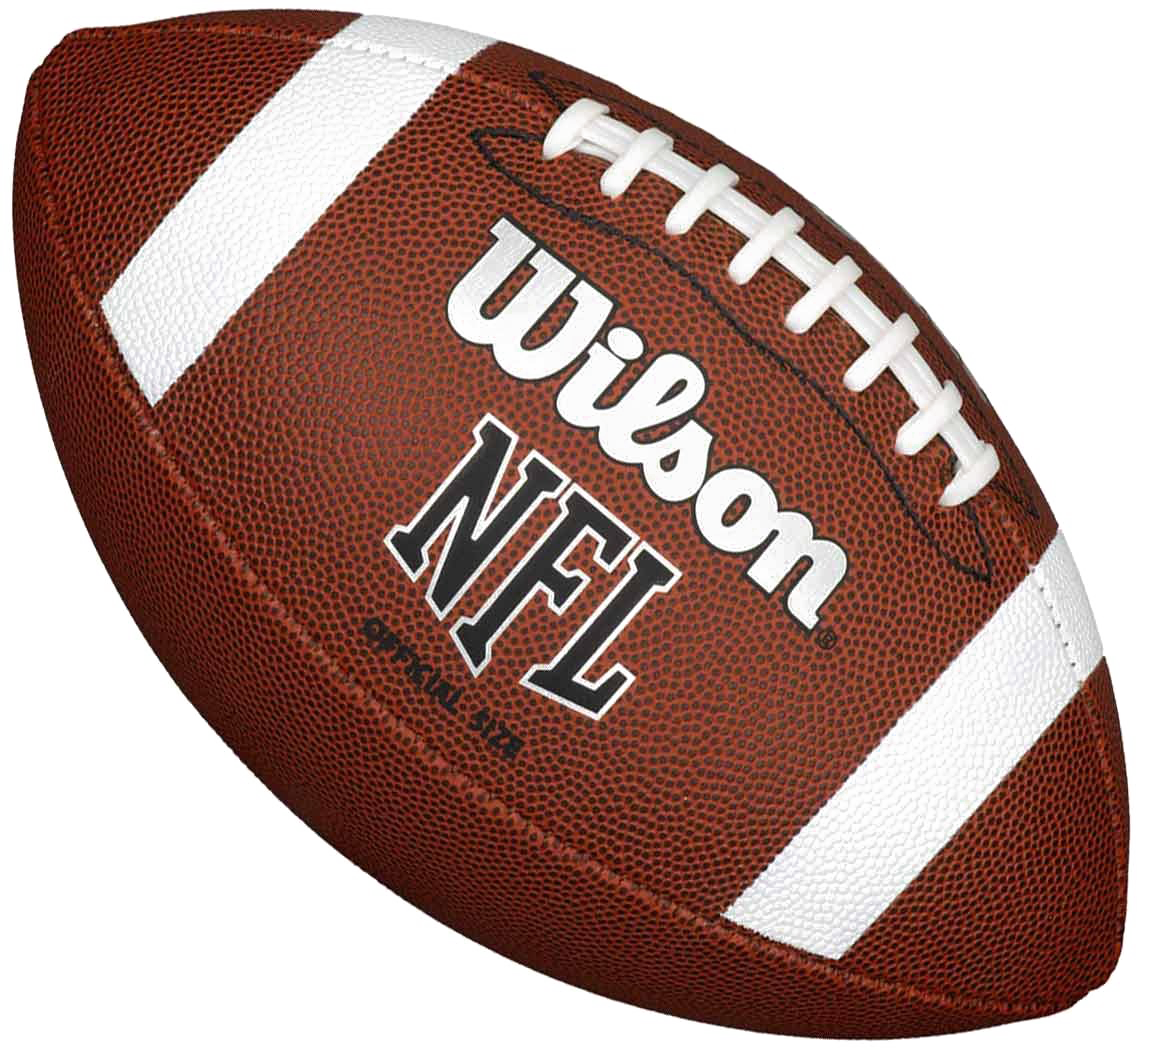 Nfl Football Official Ball - Super Bowl History: Why Are Footballs